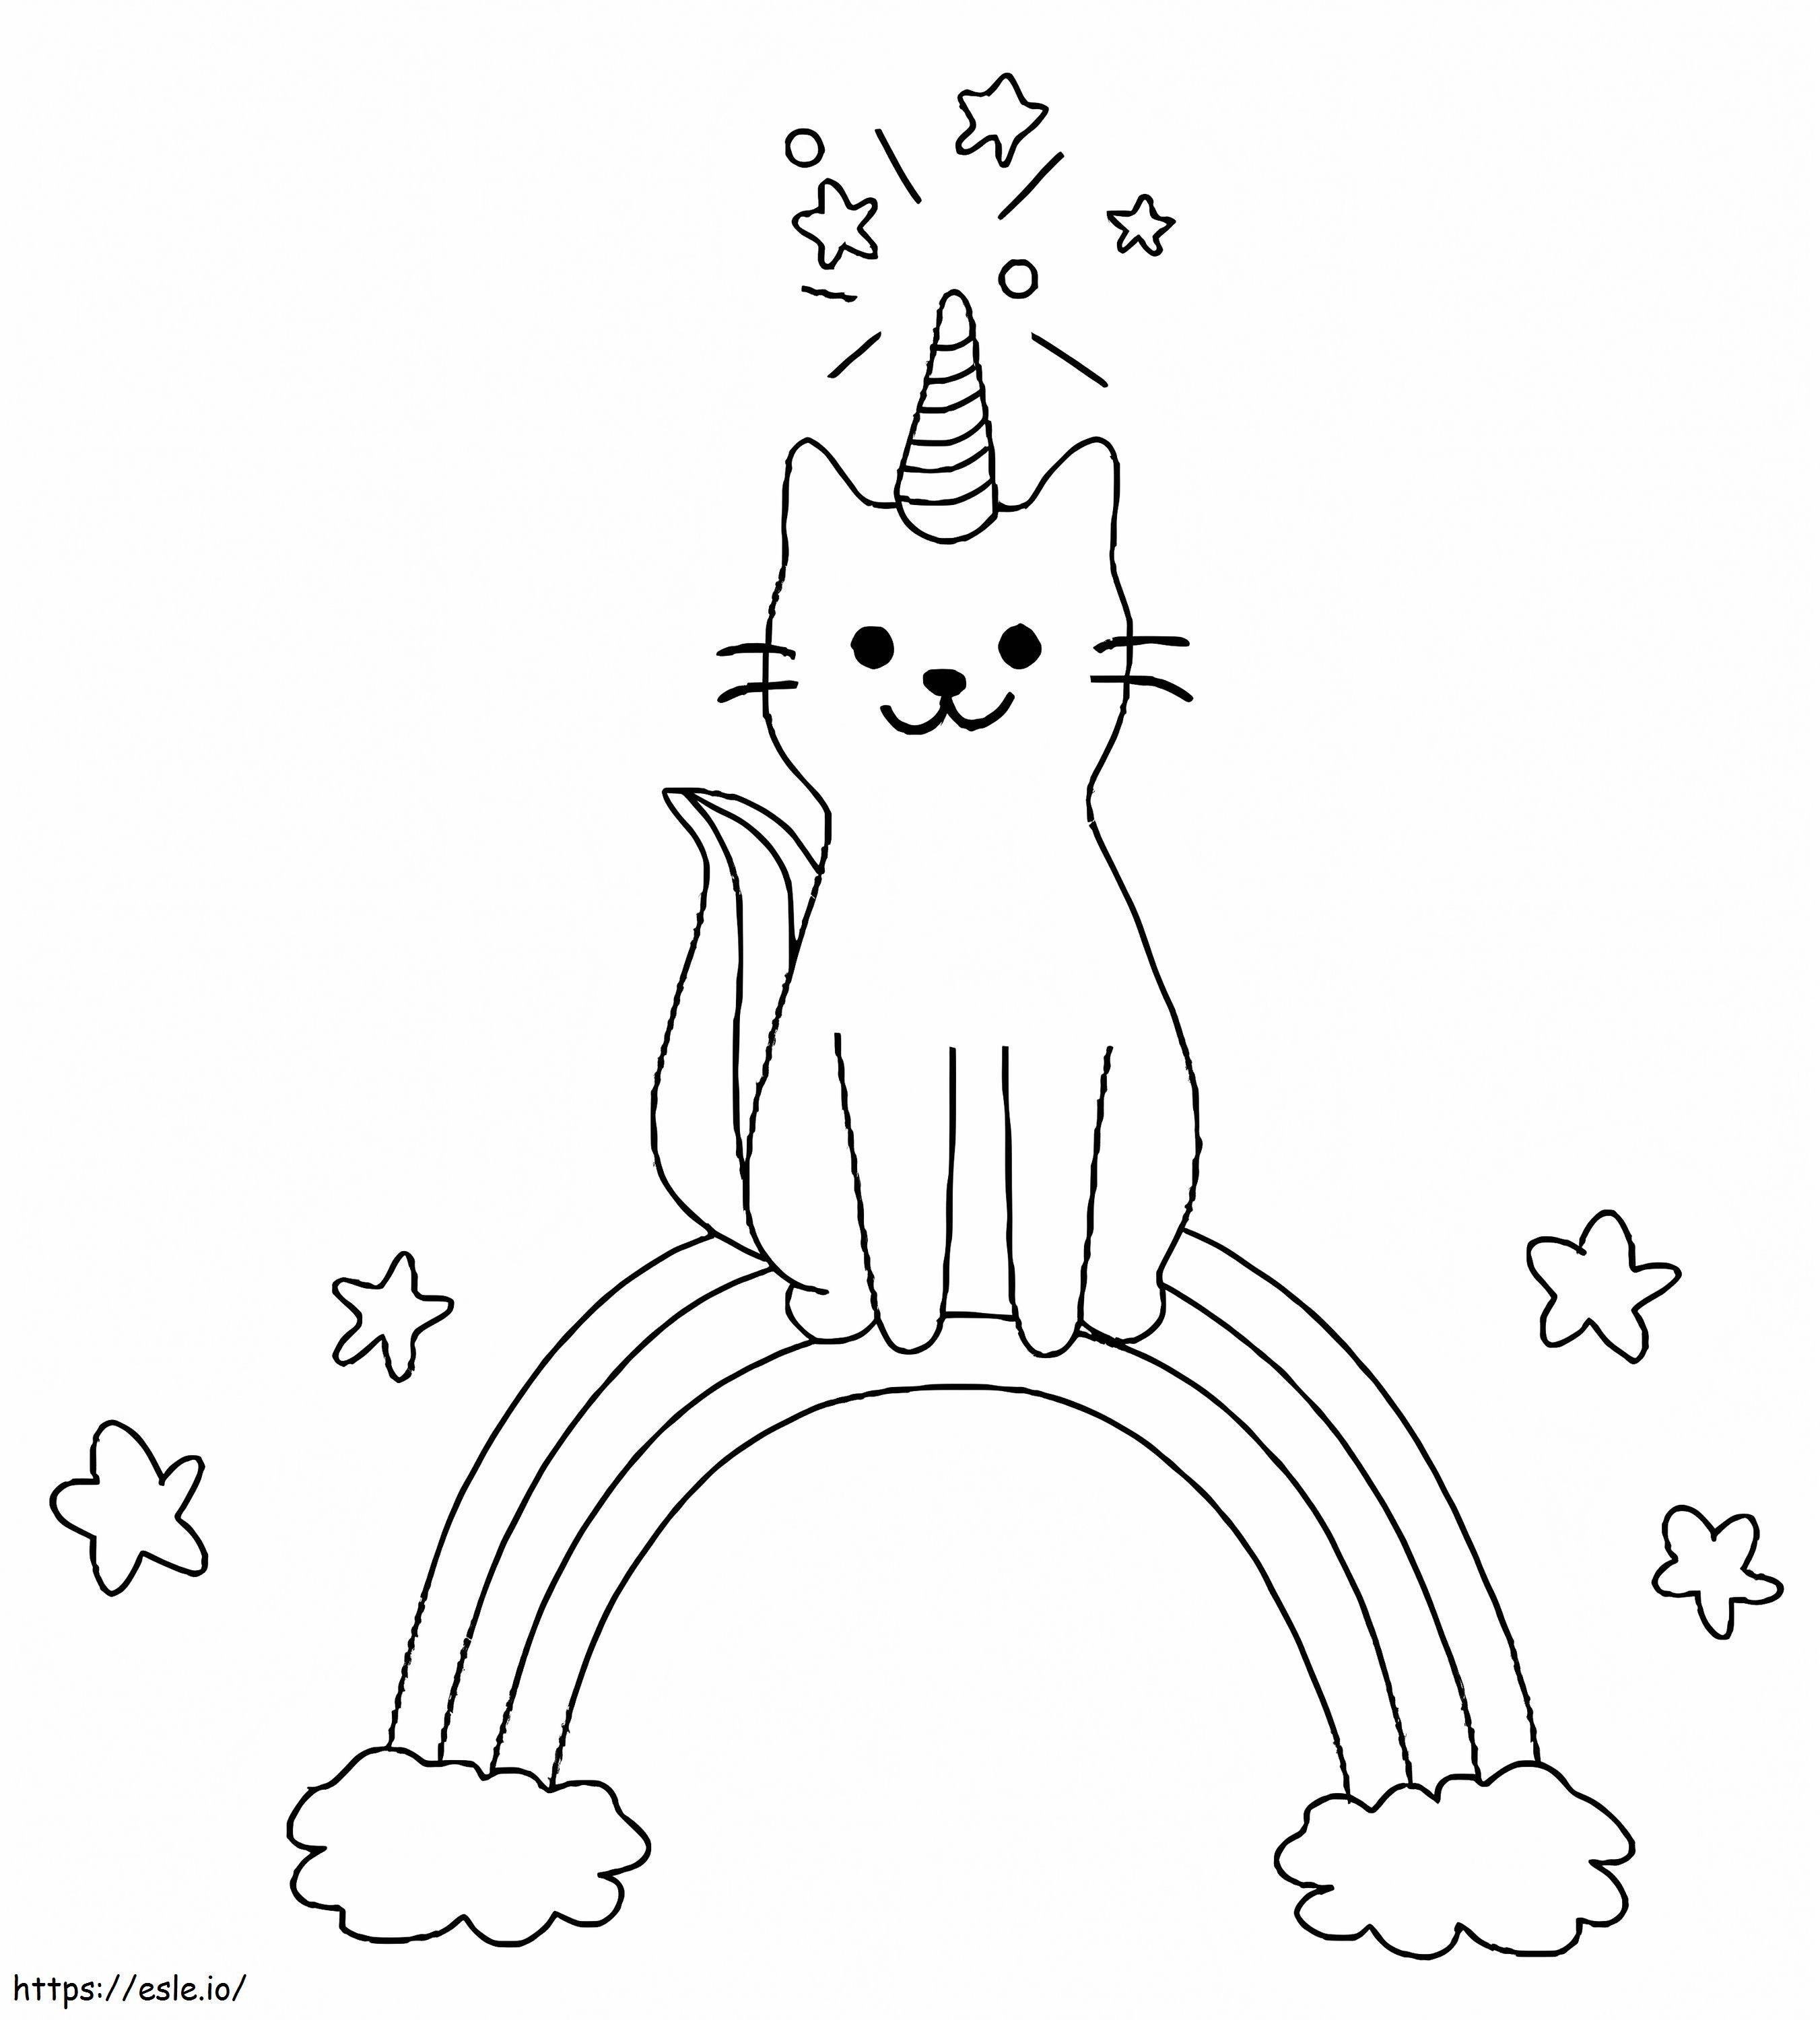 Cool Unicorn Cat coloring page